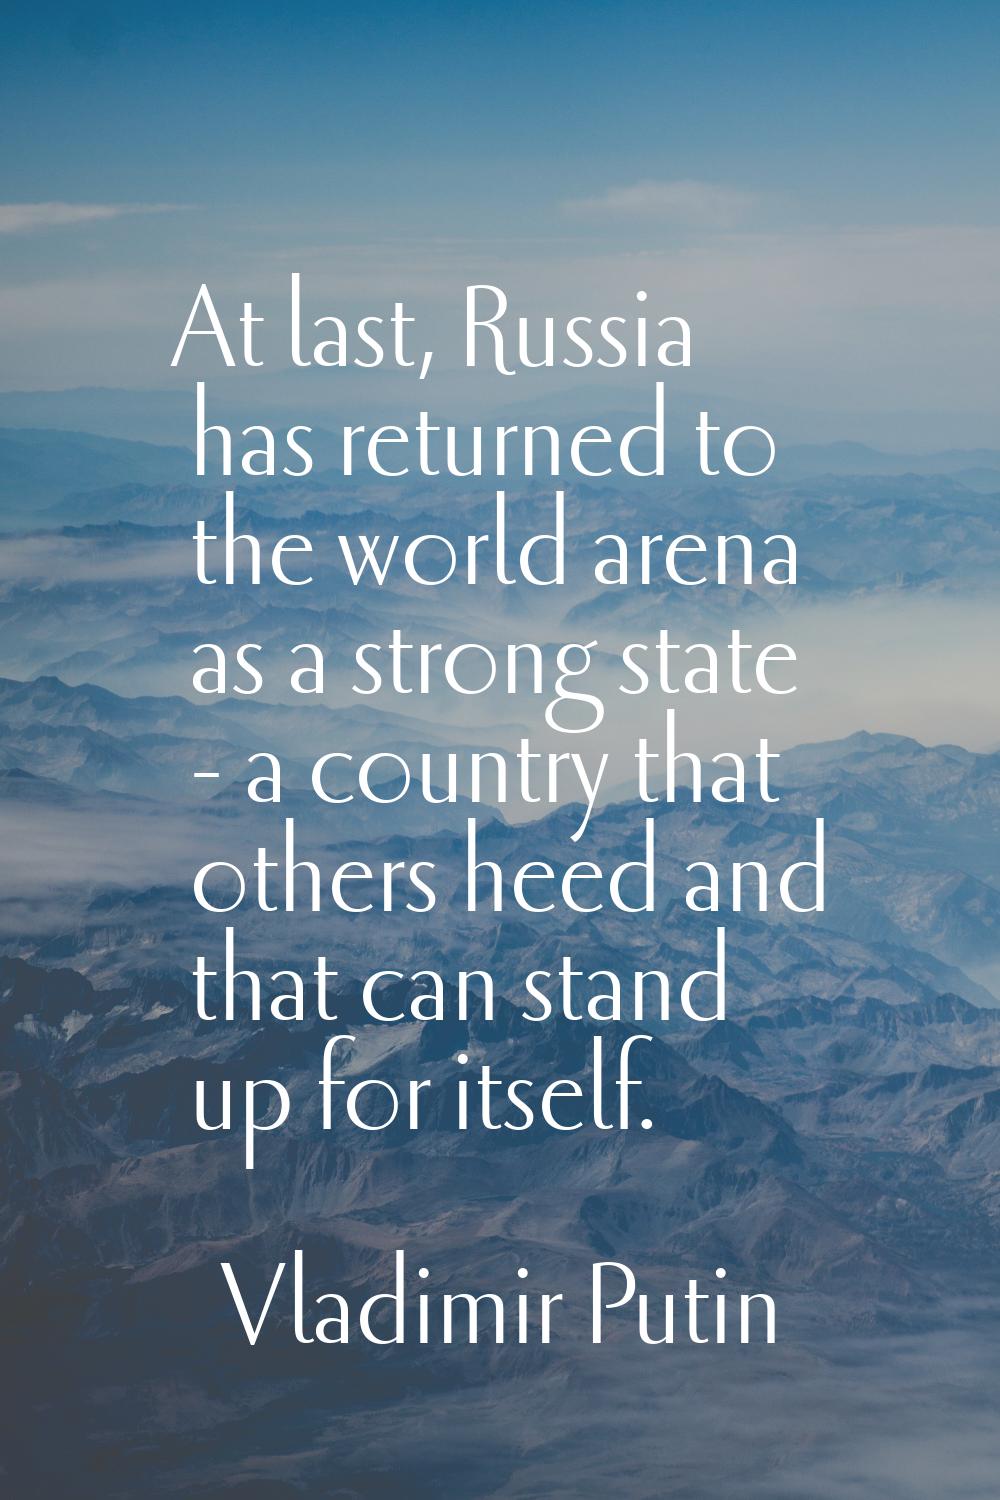 At last, Russia has returned to the world arena as a strong state - a country that others heed and 